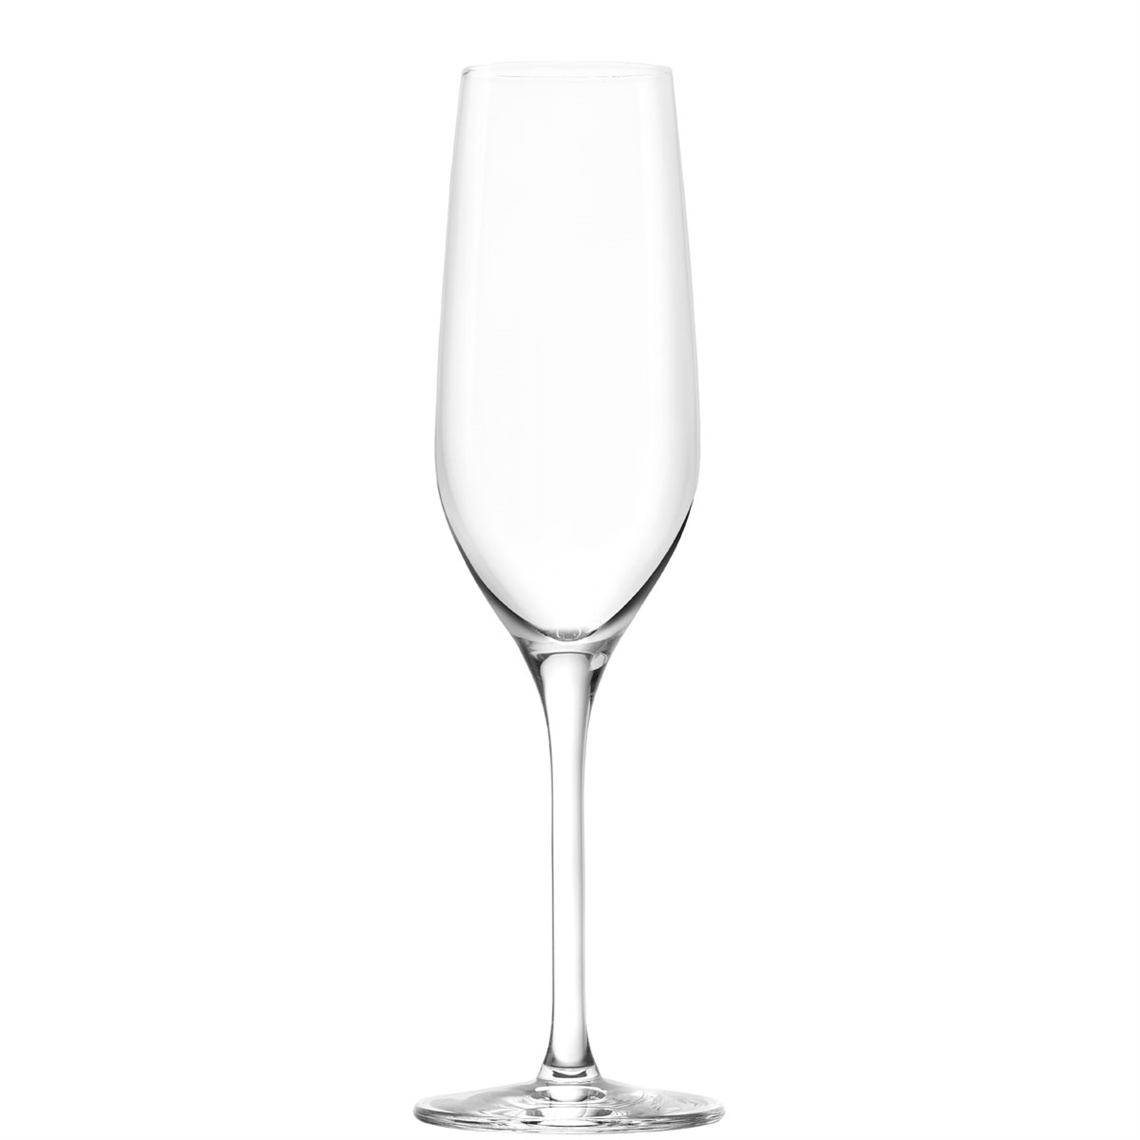 Stolzle Olly Smith Charm Collection Champagne Glass / Flute - Set of 4